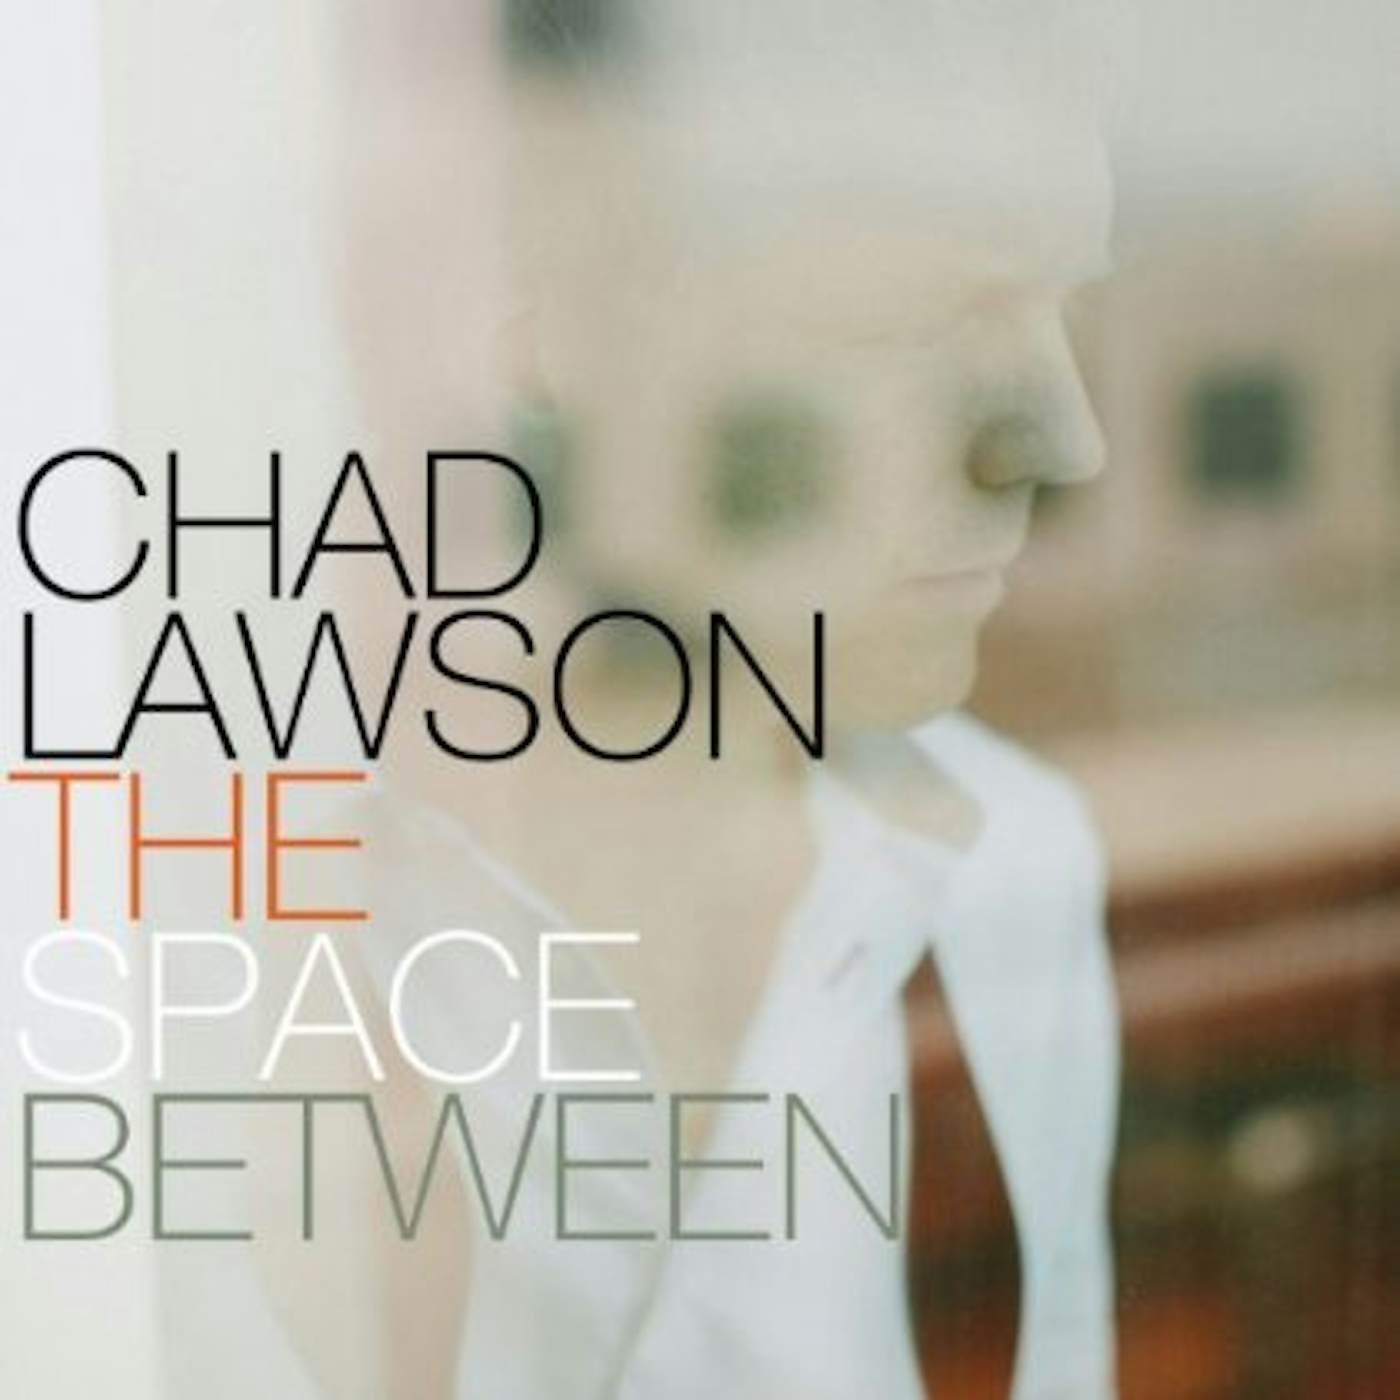 Chad Lawson SPACE BETWEEN CD